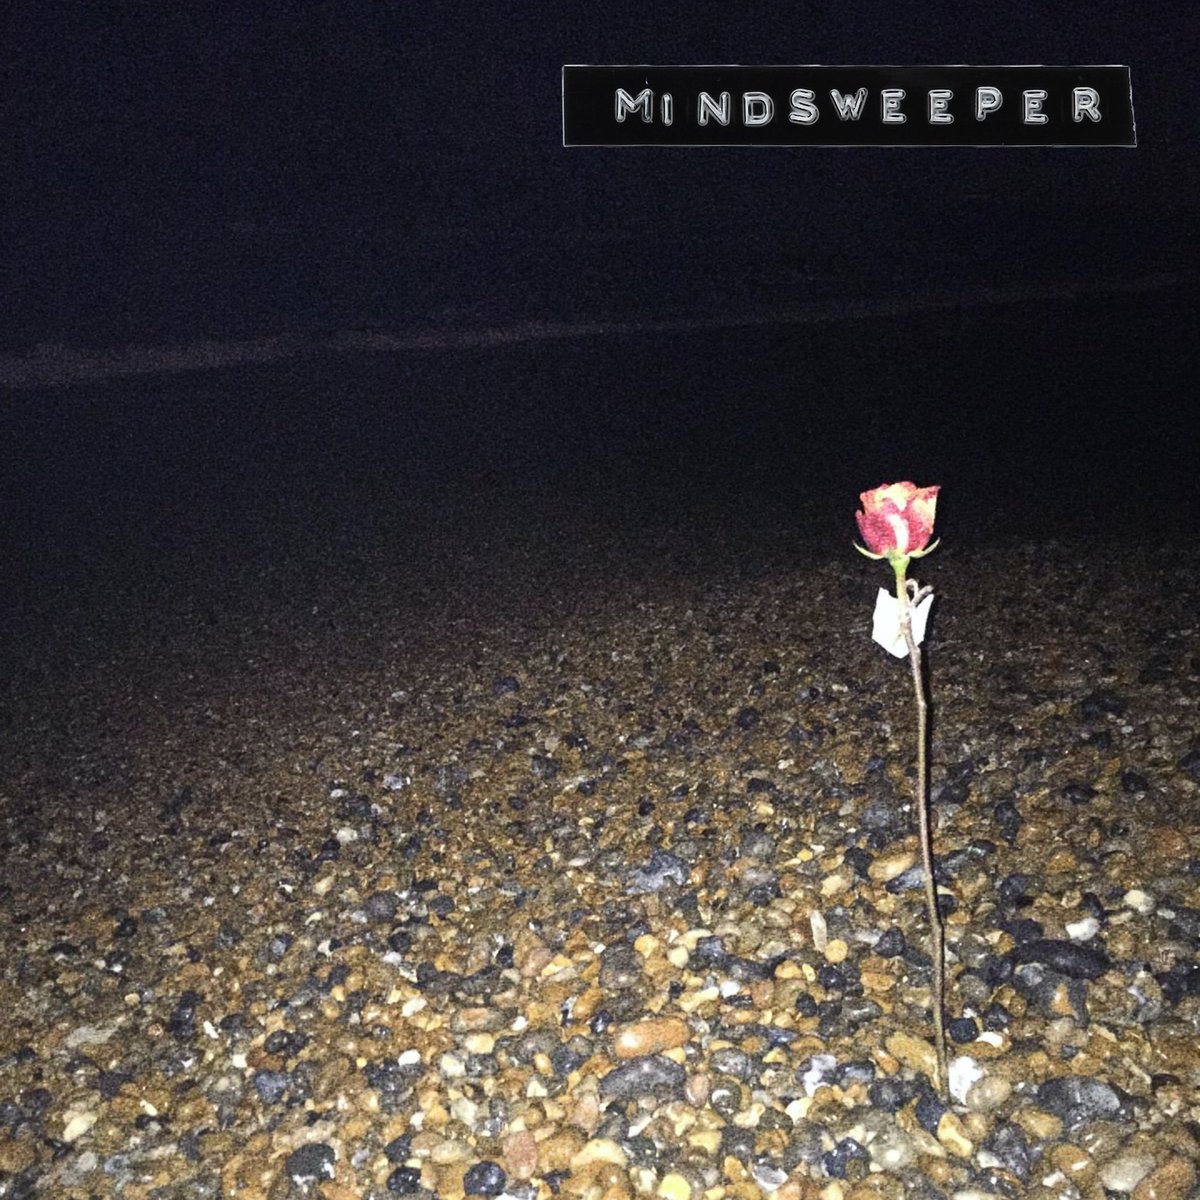 Next up for release is “Mindsweeper“. It’ll be out 9th of Feb ★ {pre-save in bio} 📸: @hannah_schwaiger